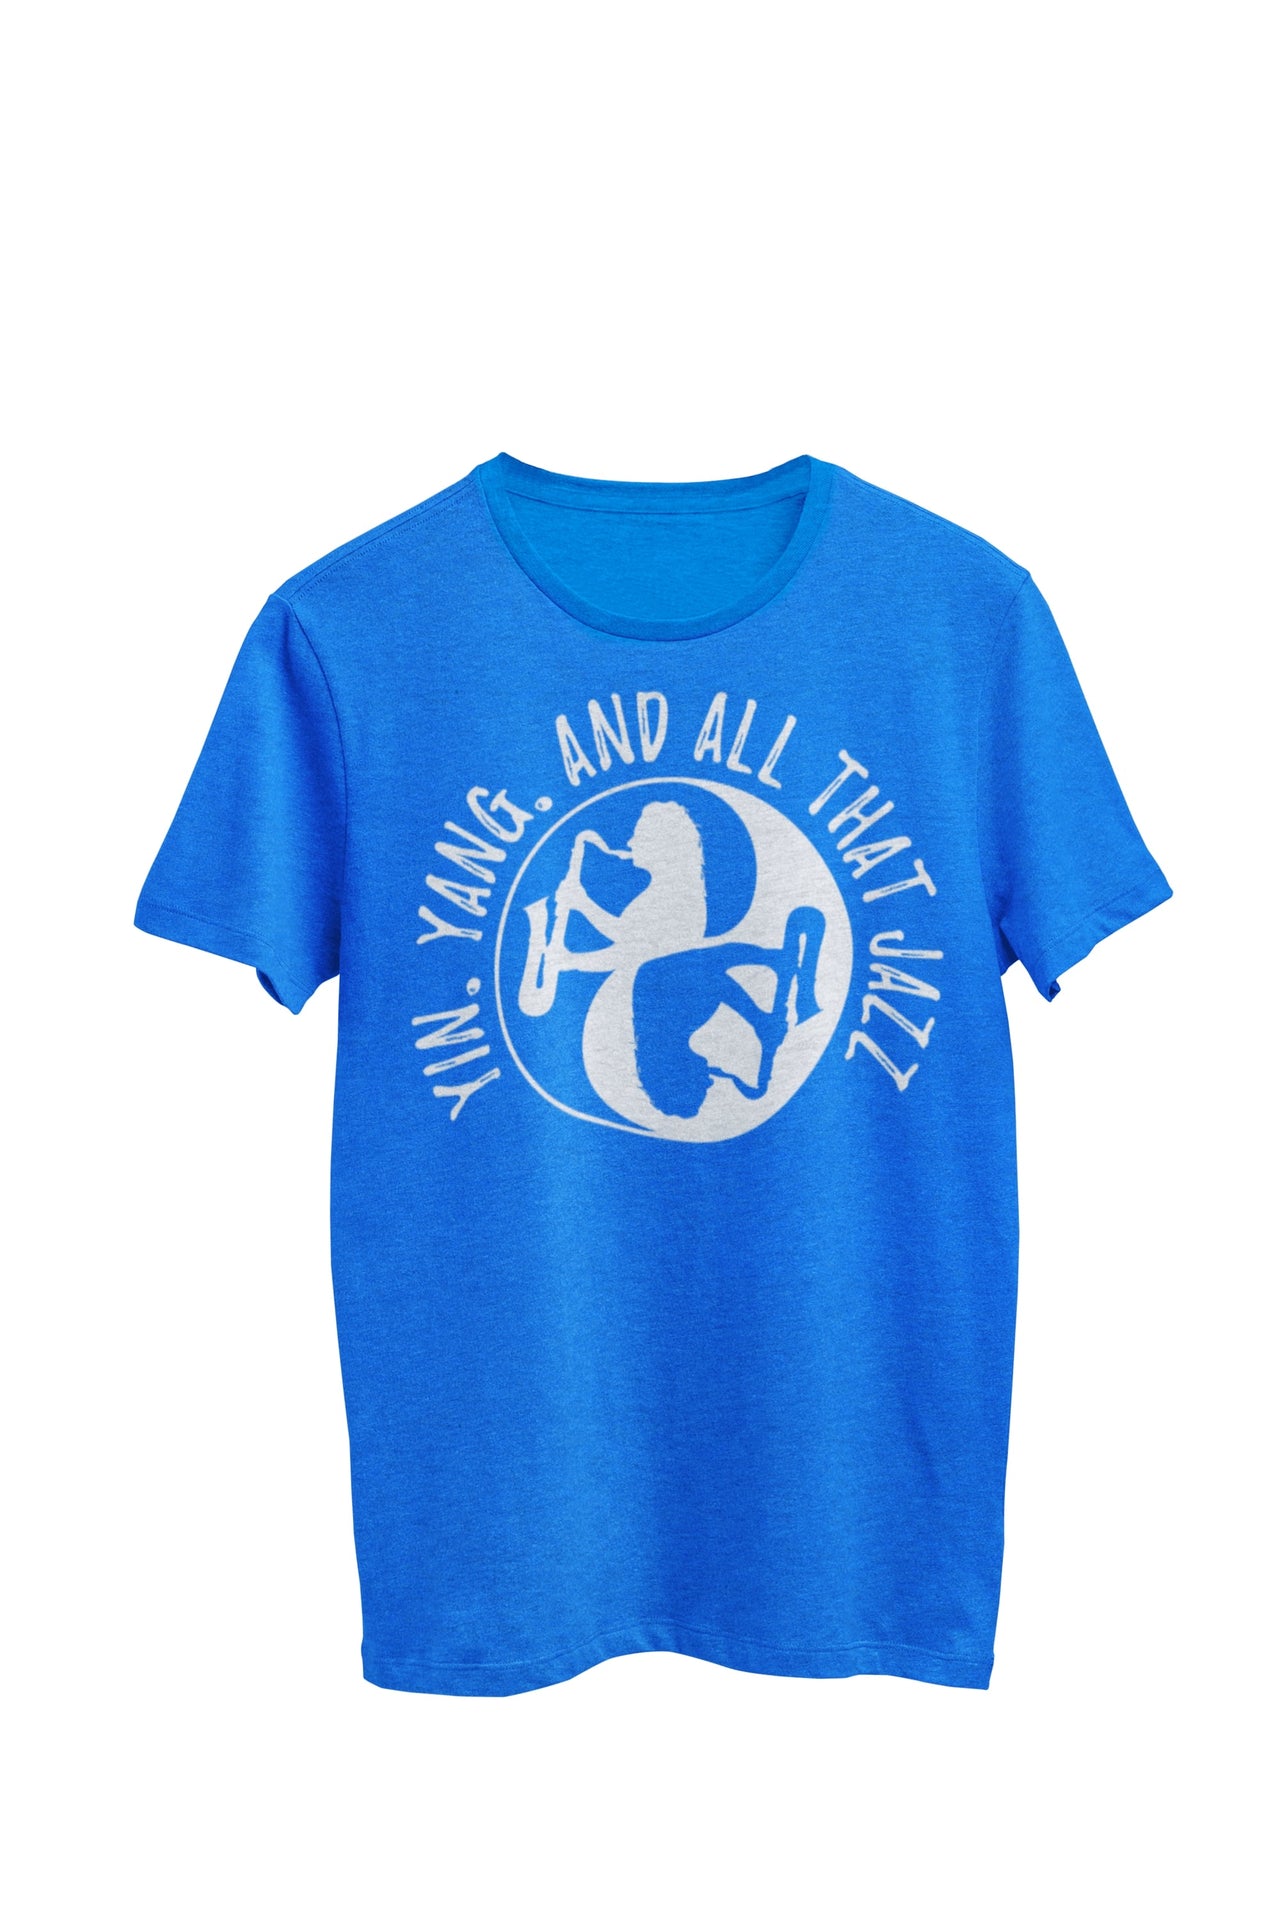 Royal blue heather unisex t-shirt featuring the text 'Yin Yang and All that Jazz', with a saxophone player incorporated into the Yin Yang symbol. Designed by WooHoo Apparel.